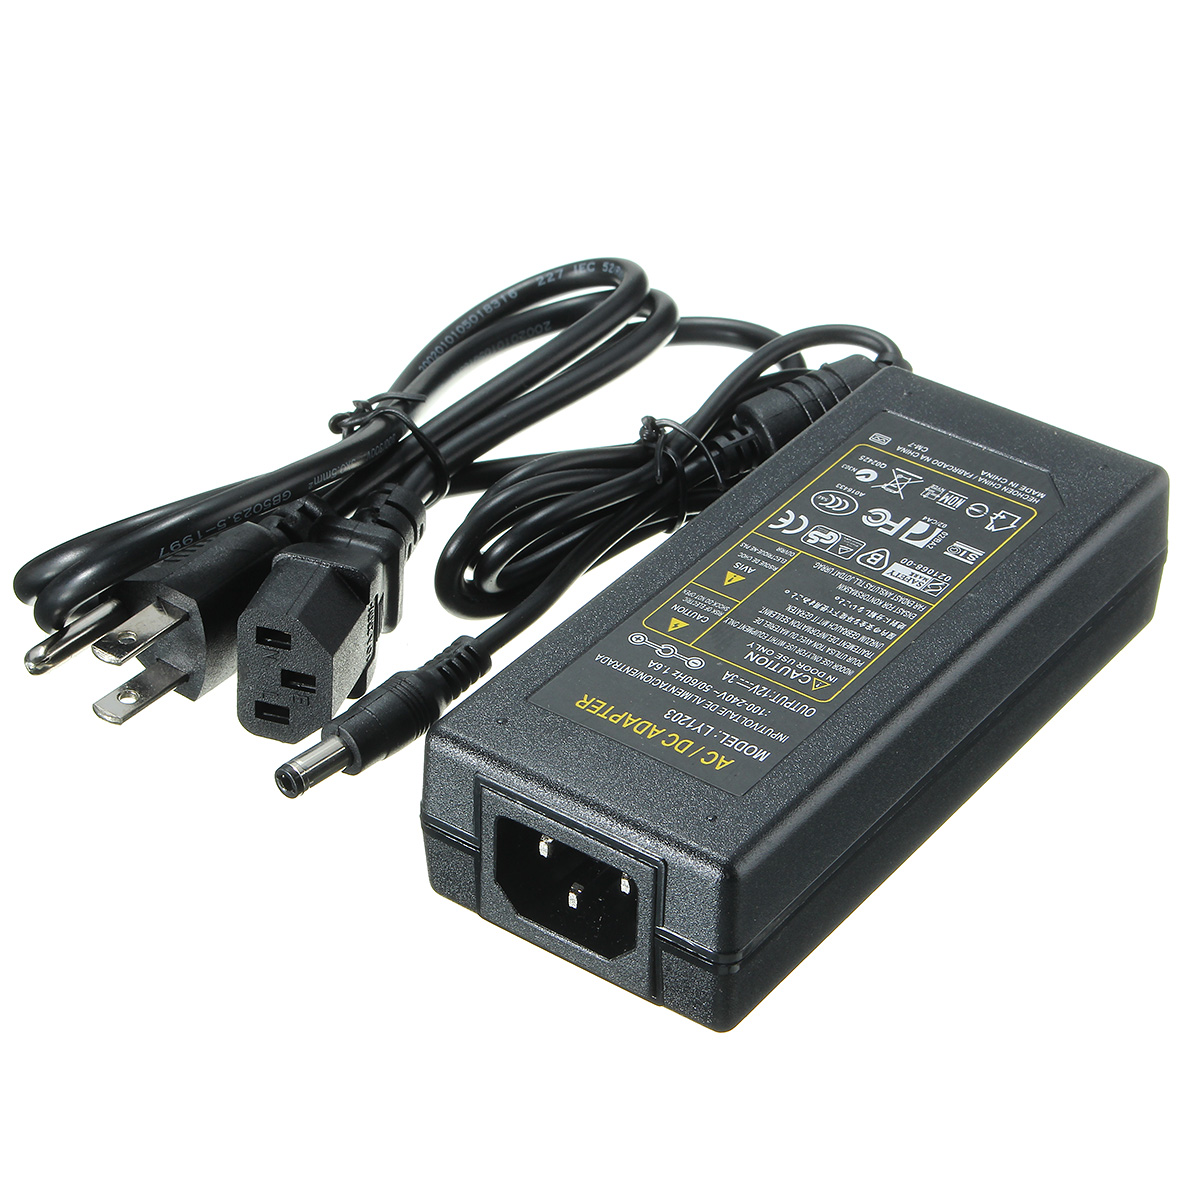 AC-100-240V-to-DC-12V-3A-36W-Power-Supply-Adapter-for-LED-Strip-86979-4